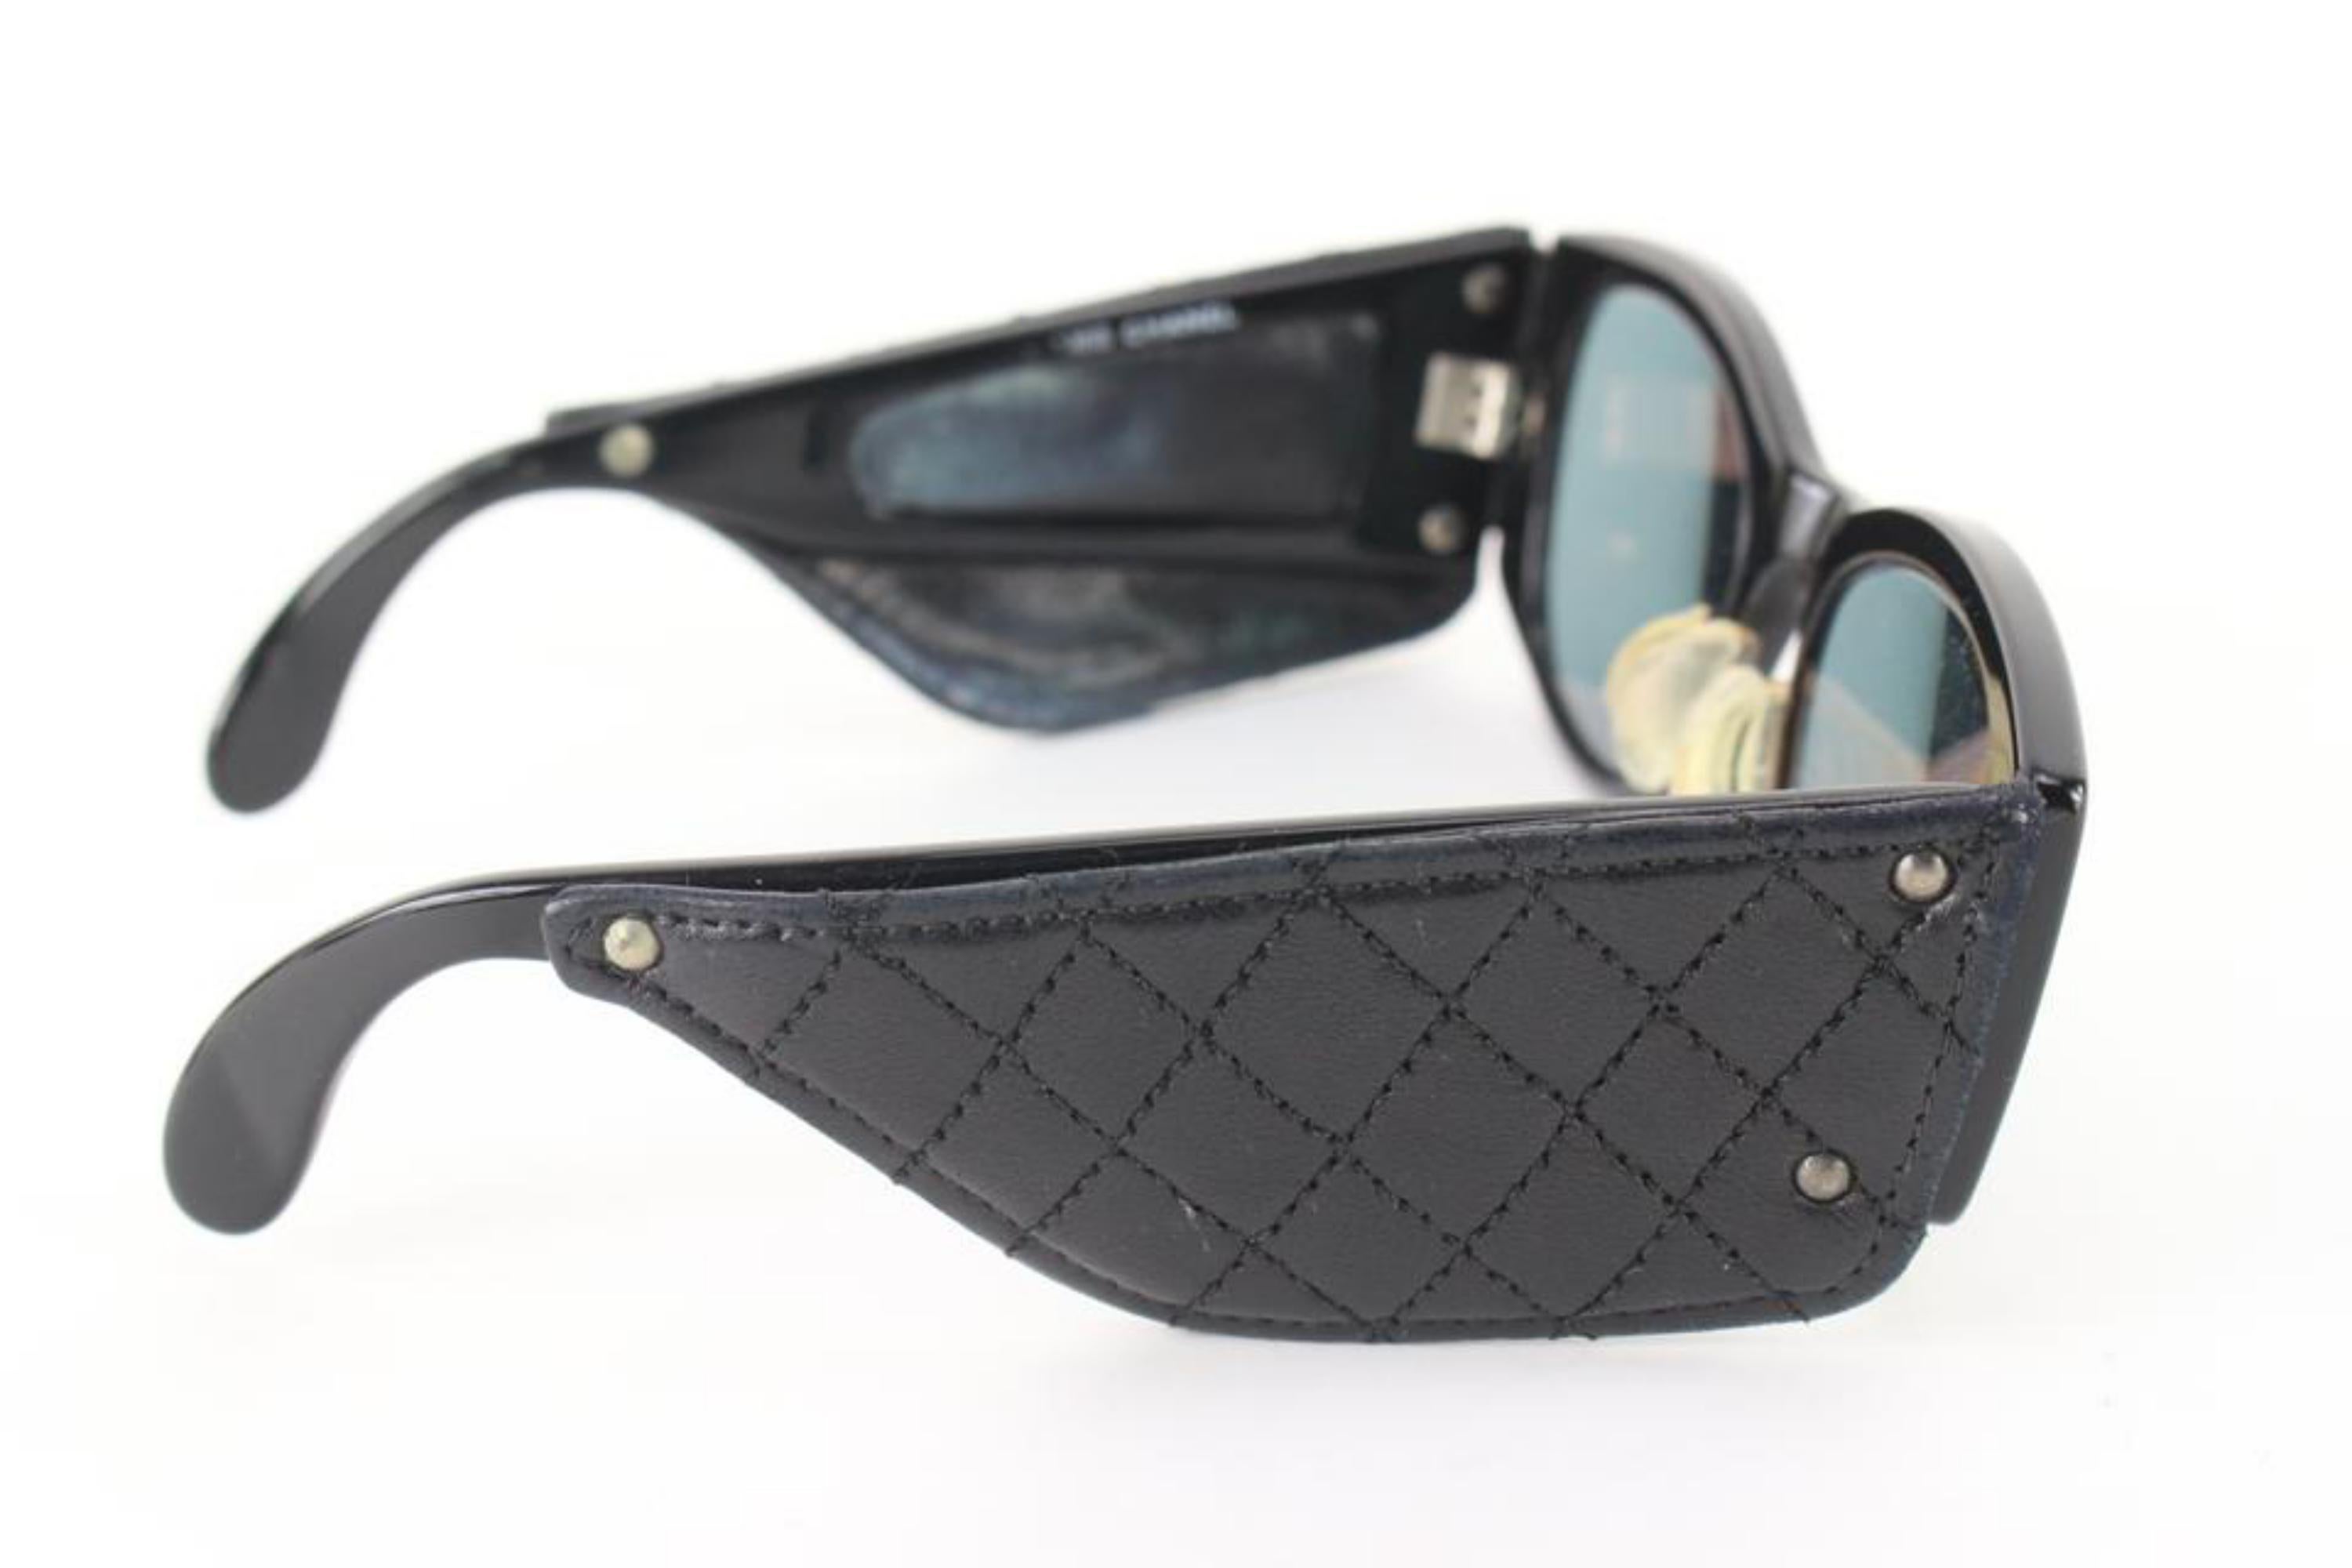 Chanel Rare Vintage Black Quilted Lambskin 1988 Sunglasses 1cz822s 8